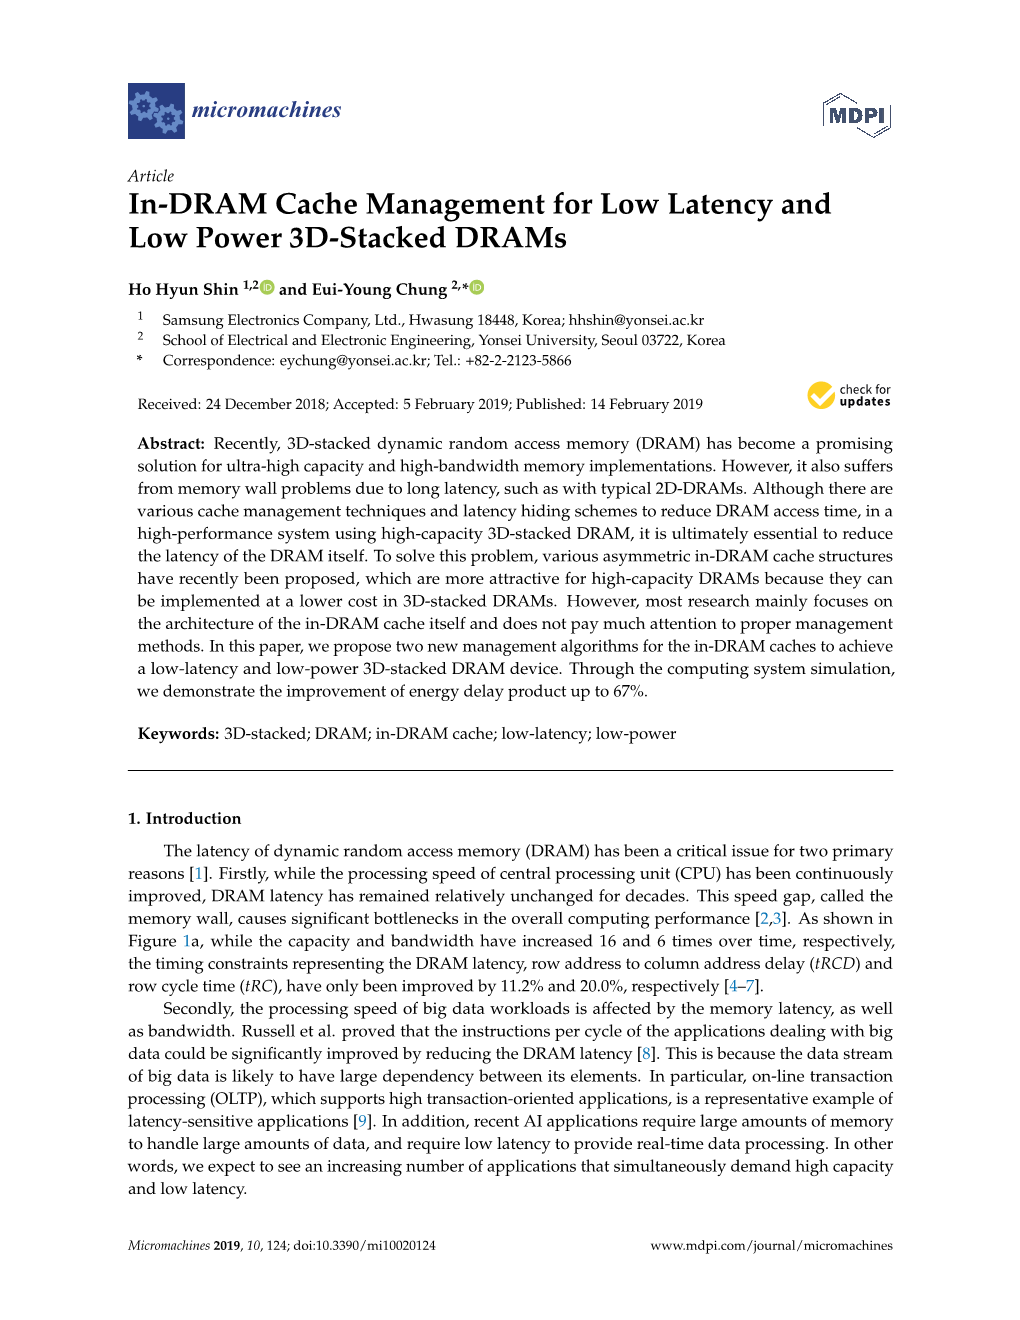 In-DRAM Cache Management for Low Latency and Low Power 3D-Stacked Drams